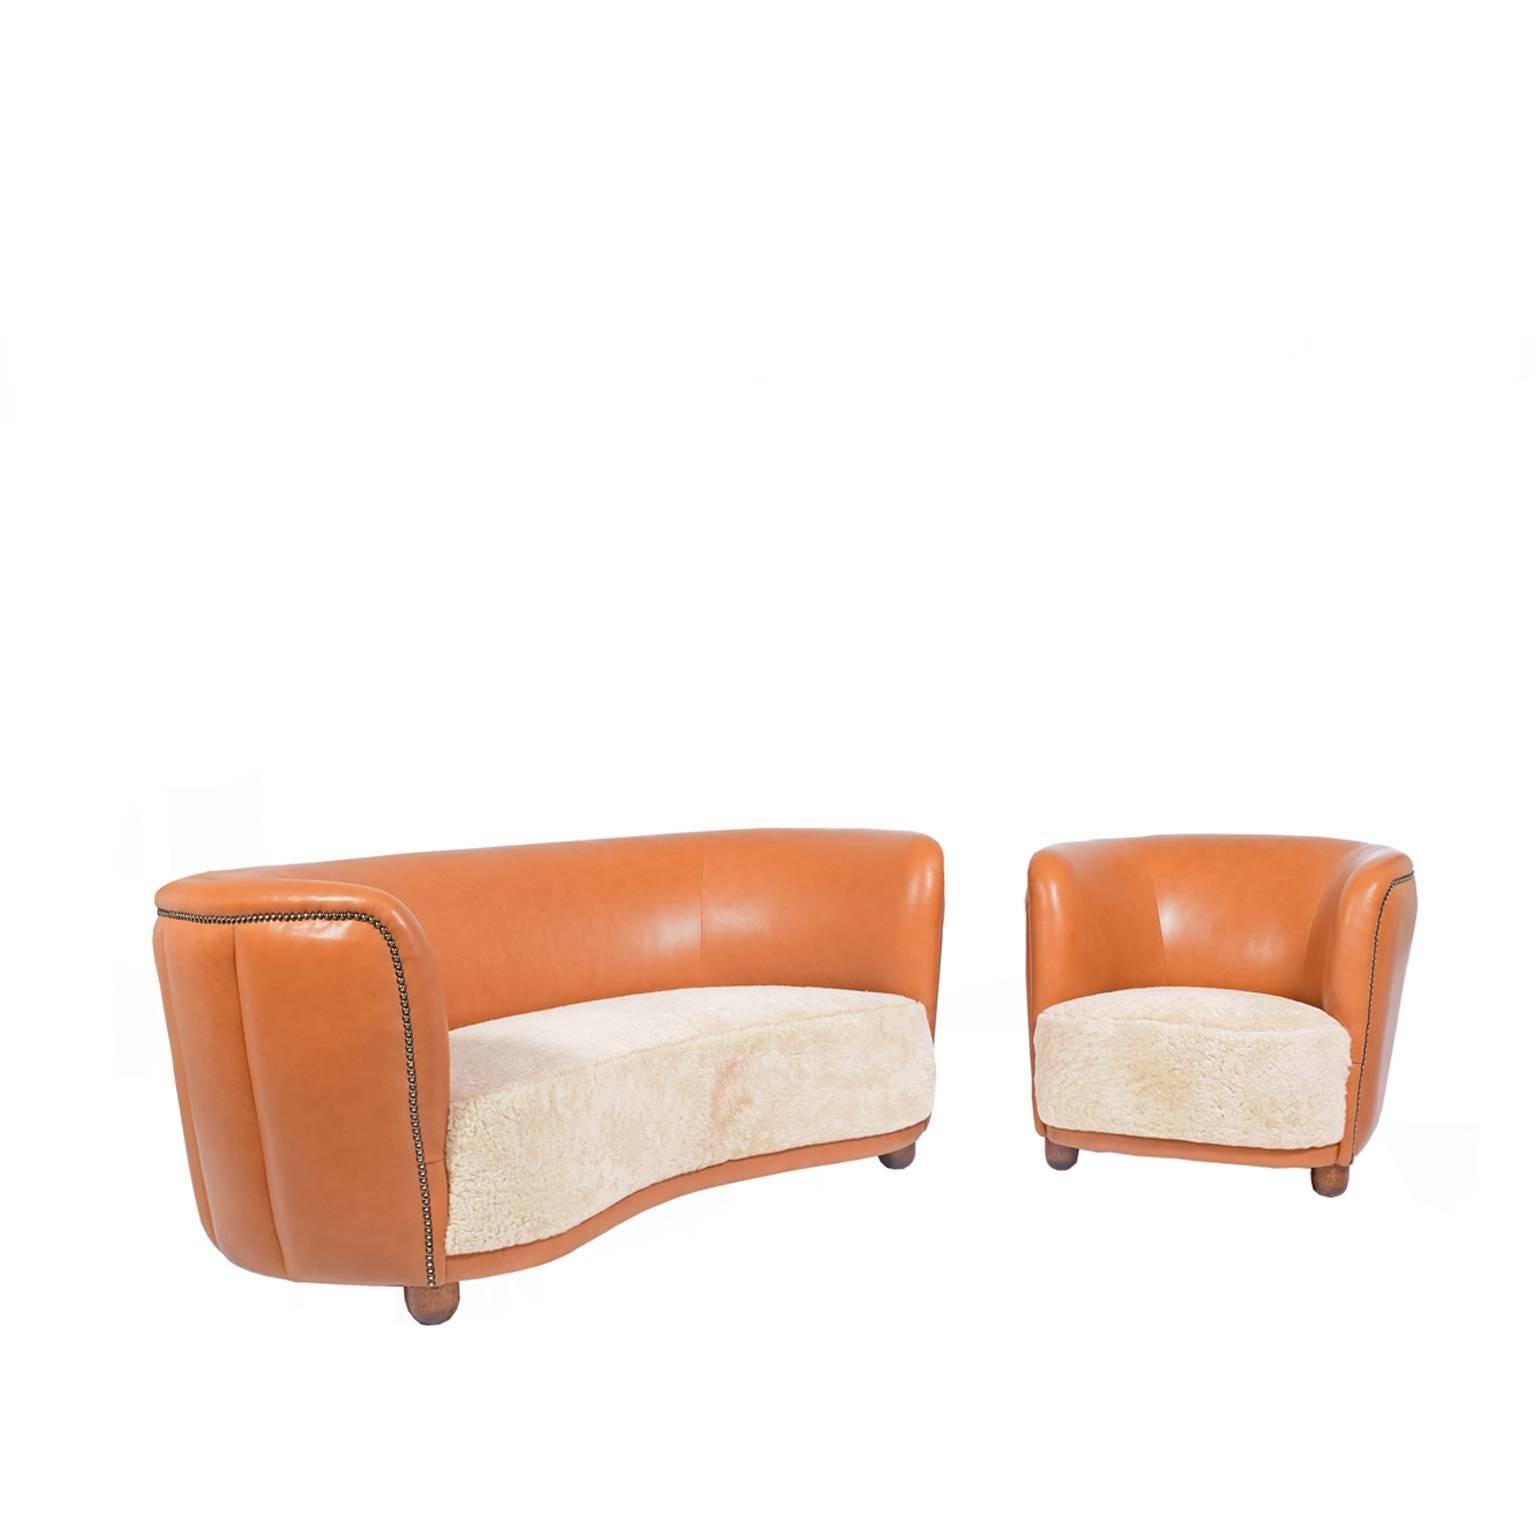 Free-form, two-seat sofa and easy chair newly upholstered in natural leather and sheepskin. Design attributed to Flemming Lassen.

Chair size:
W 30
H 26
D 31
Sh 16.